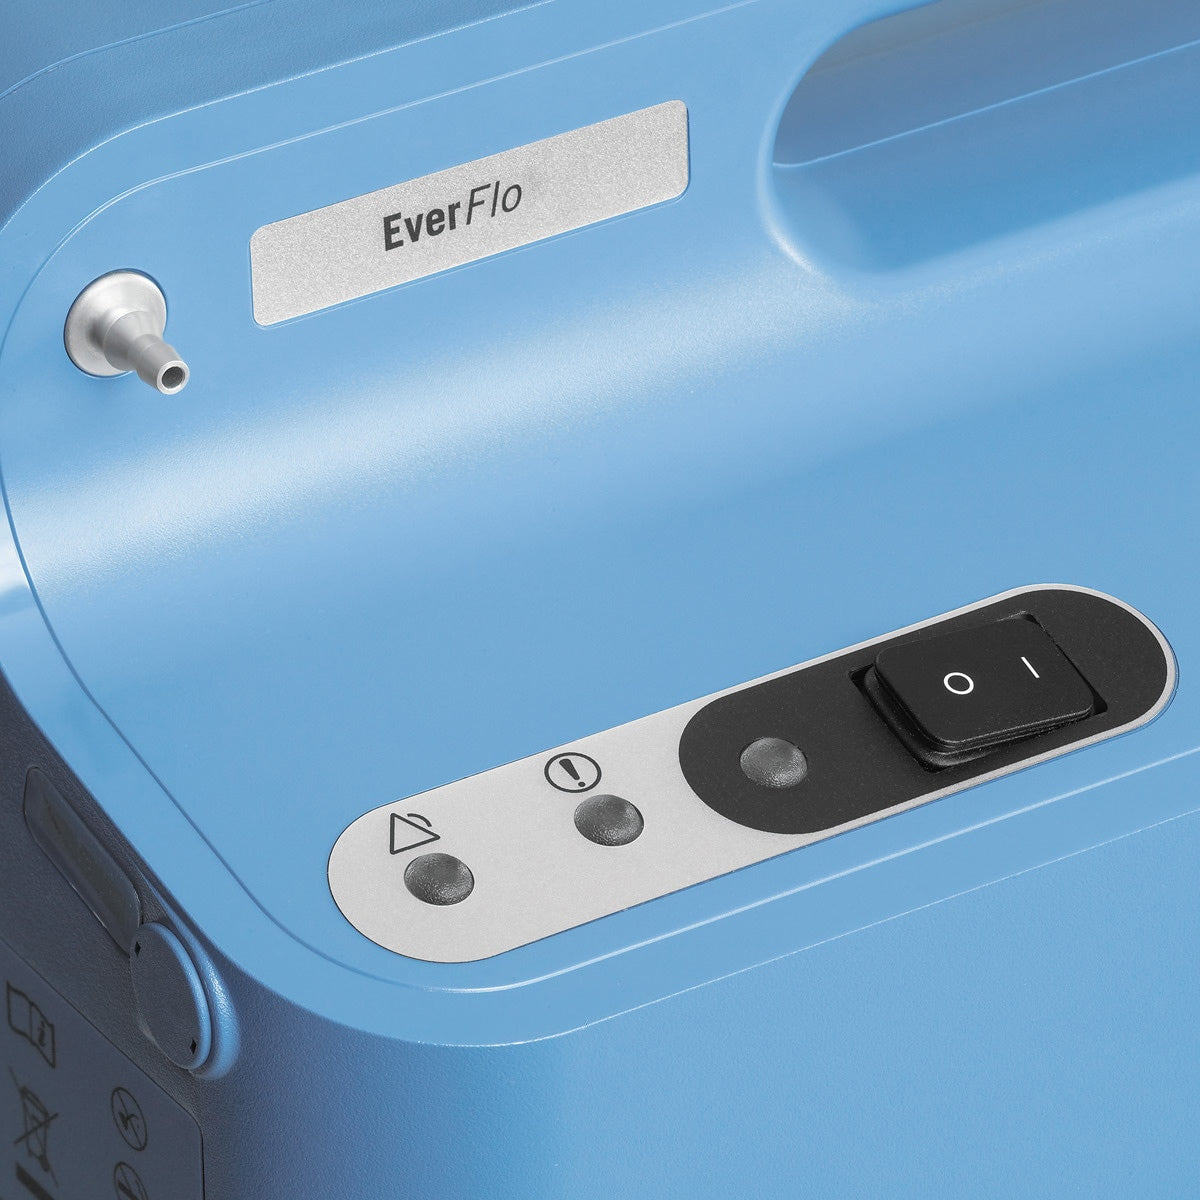 EverFlo Oxygen Concentrator name on machine.